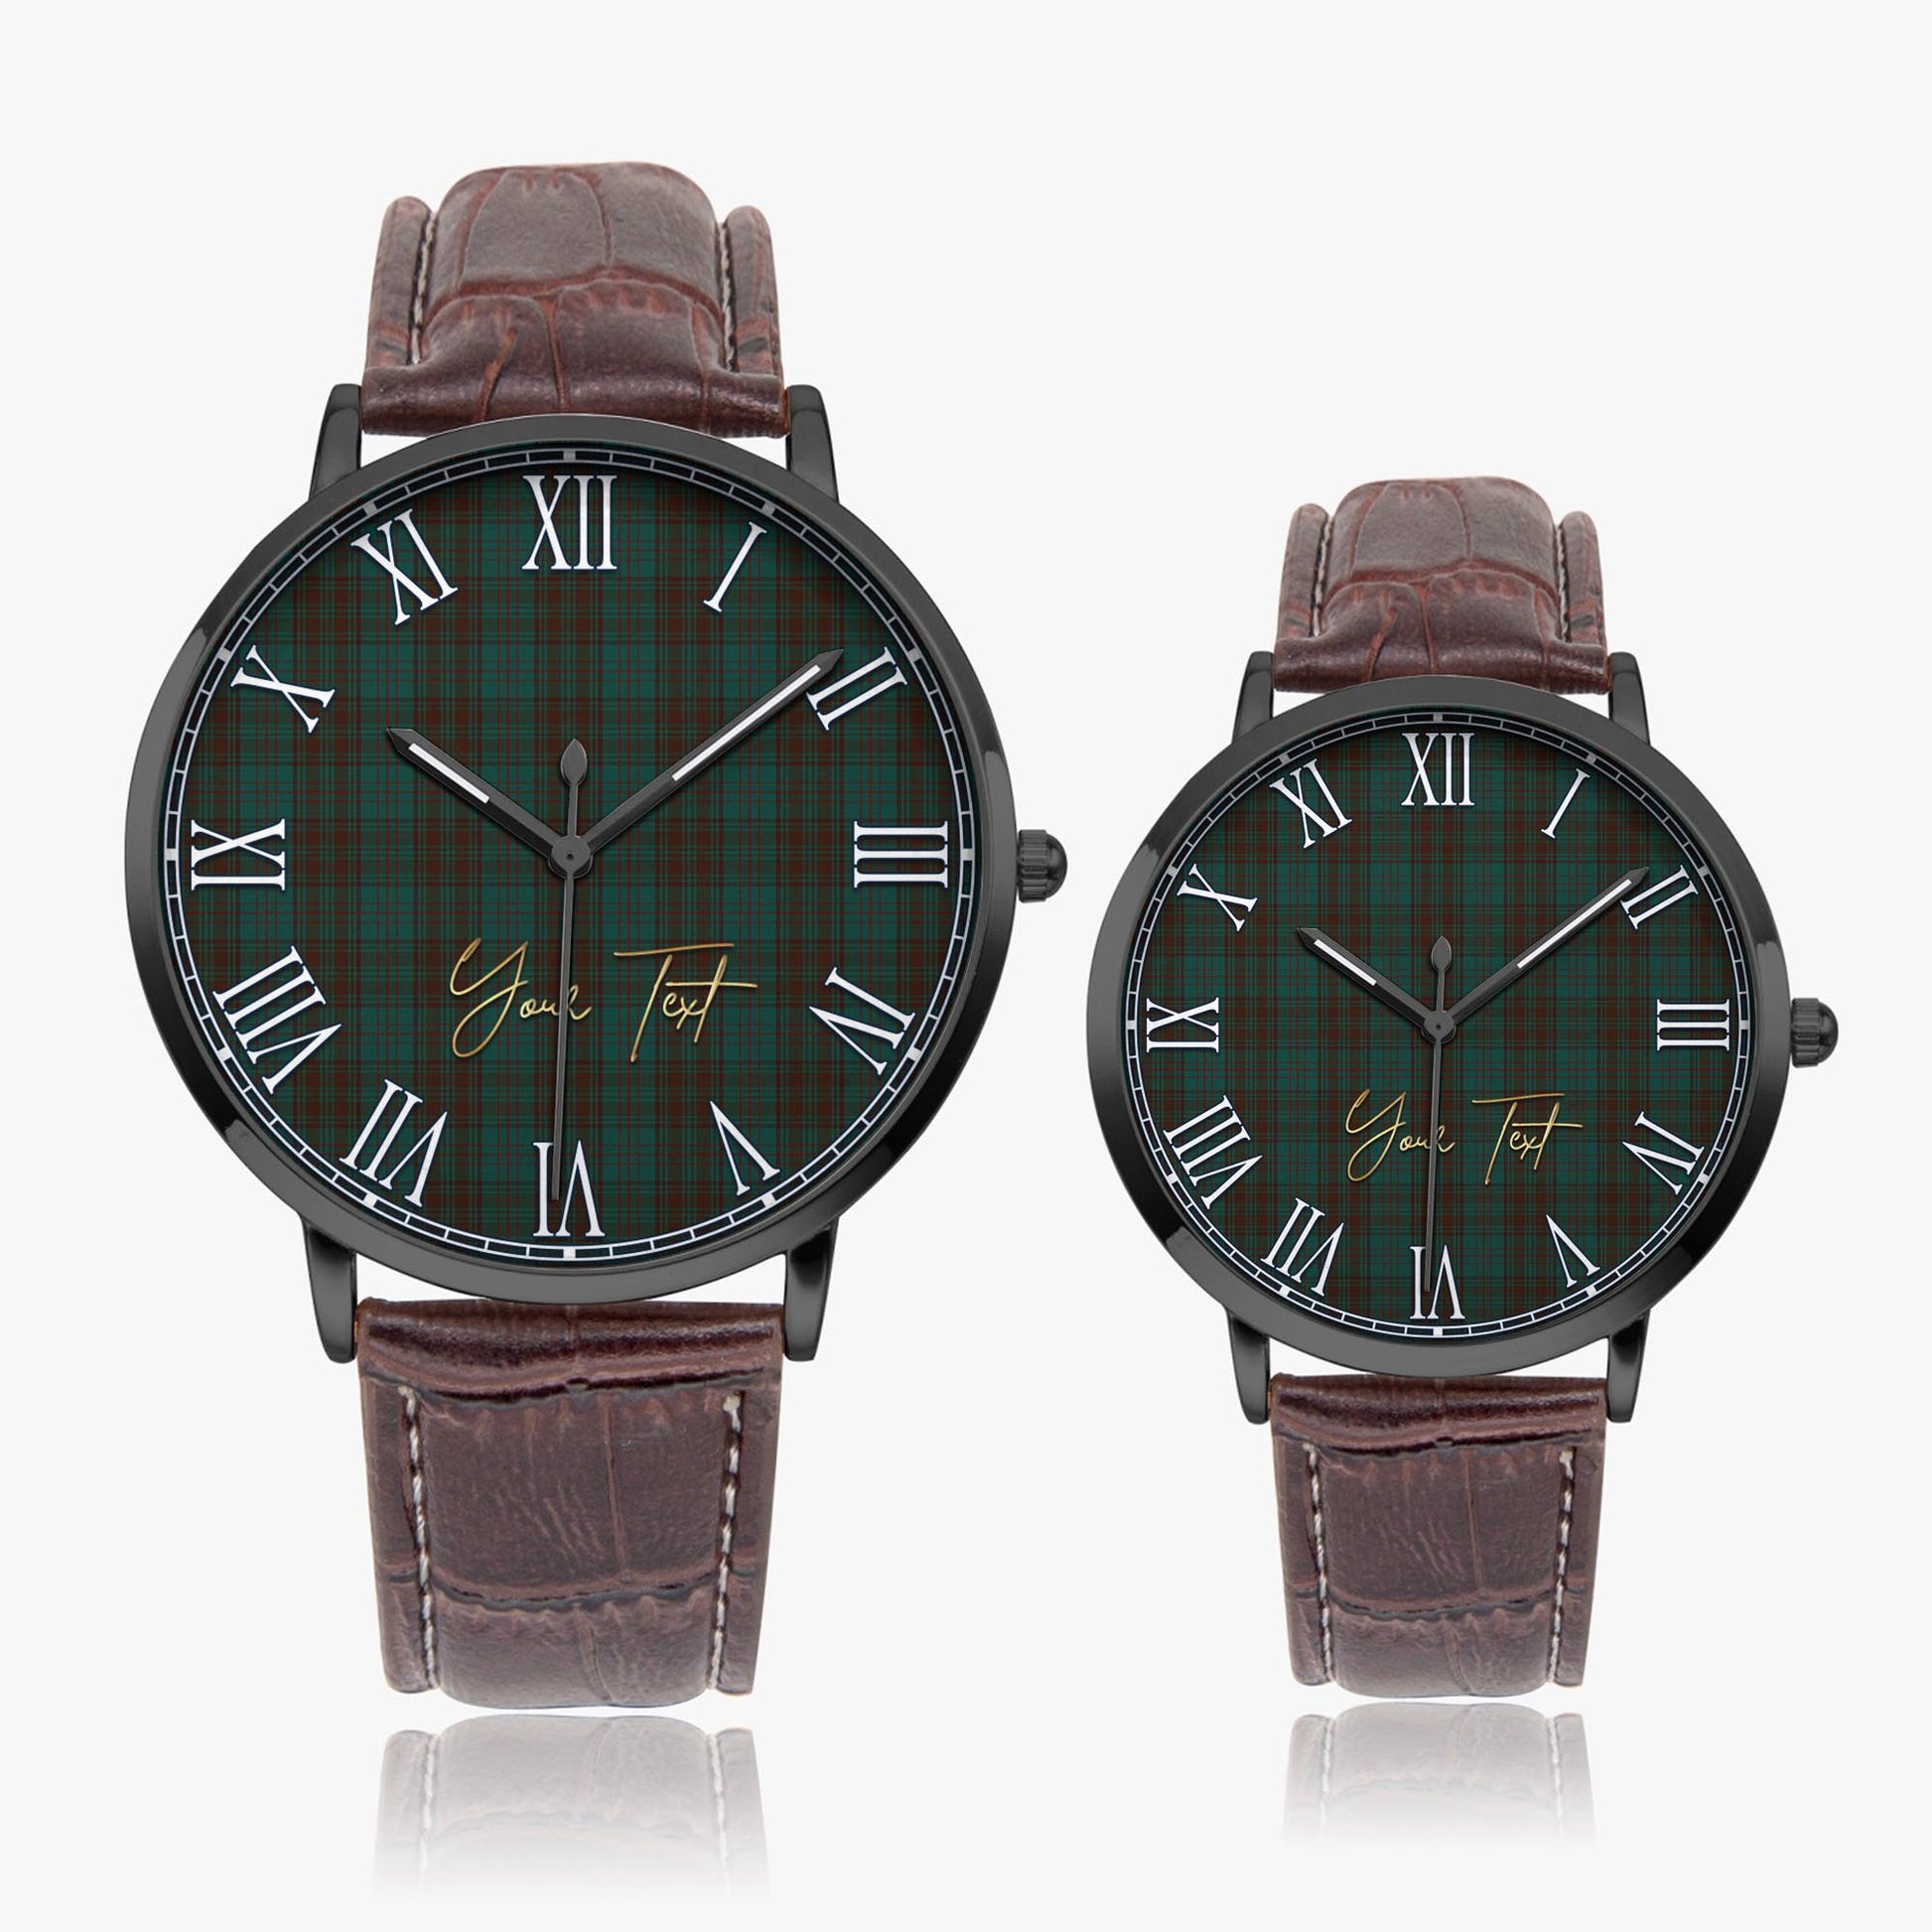 Dublin County Ireland Tartan Personalized Your Text Leather Trap Quartz Watch Ultra Thin Black Case With Brown Leather Strap - Tartanvibesclothing